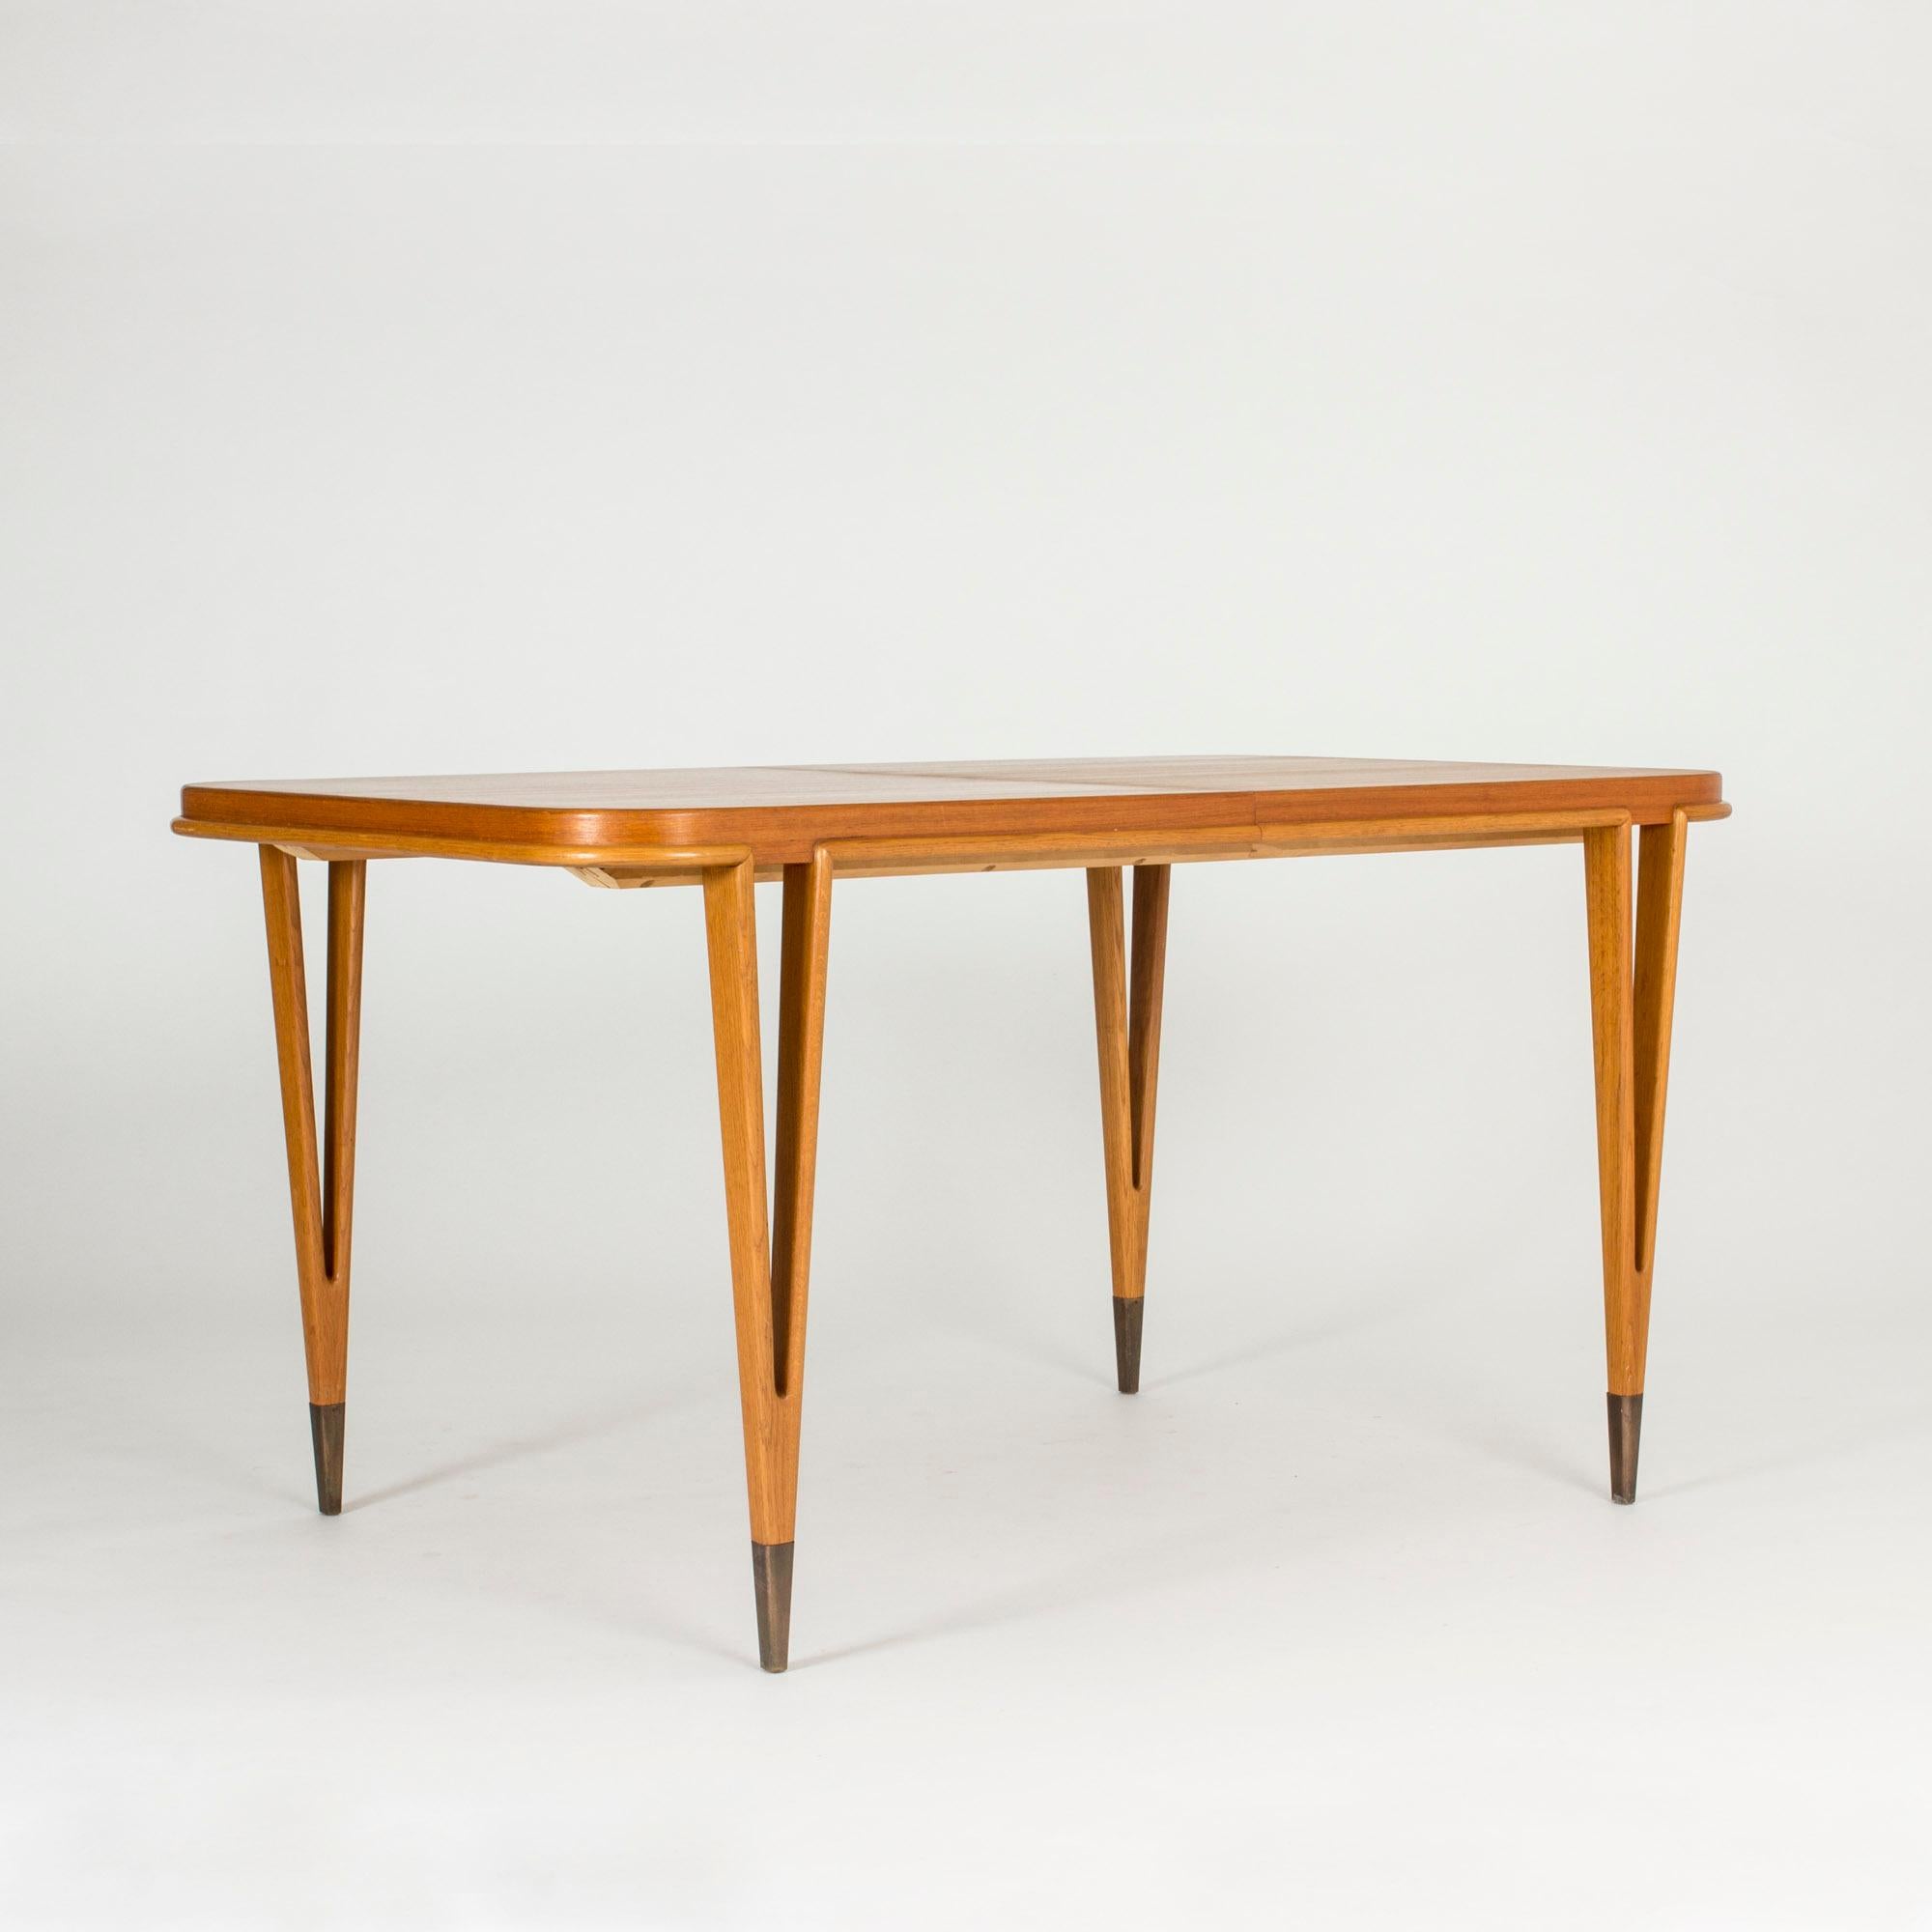 Striking, rare dining table by Bertil Fridhagen with amazing sharply V-shaped legs that form open shapes. A rim that joins the legs runs around the edge of the table top. Two extra leaves. Made from teak with brass feet.

The width of the table is